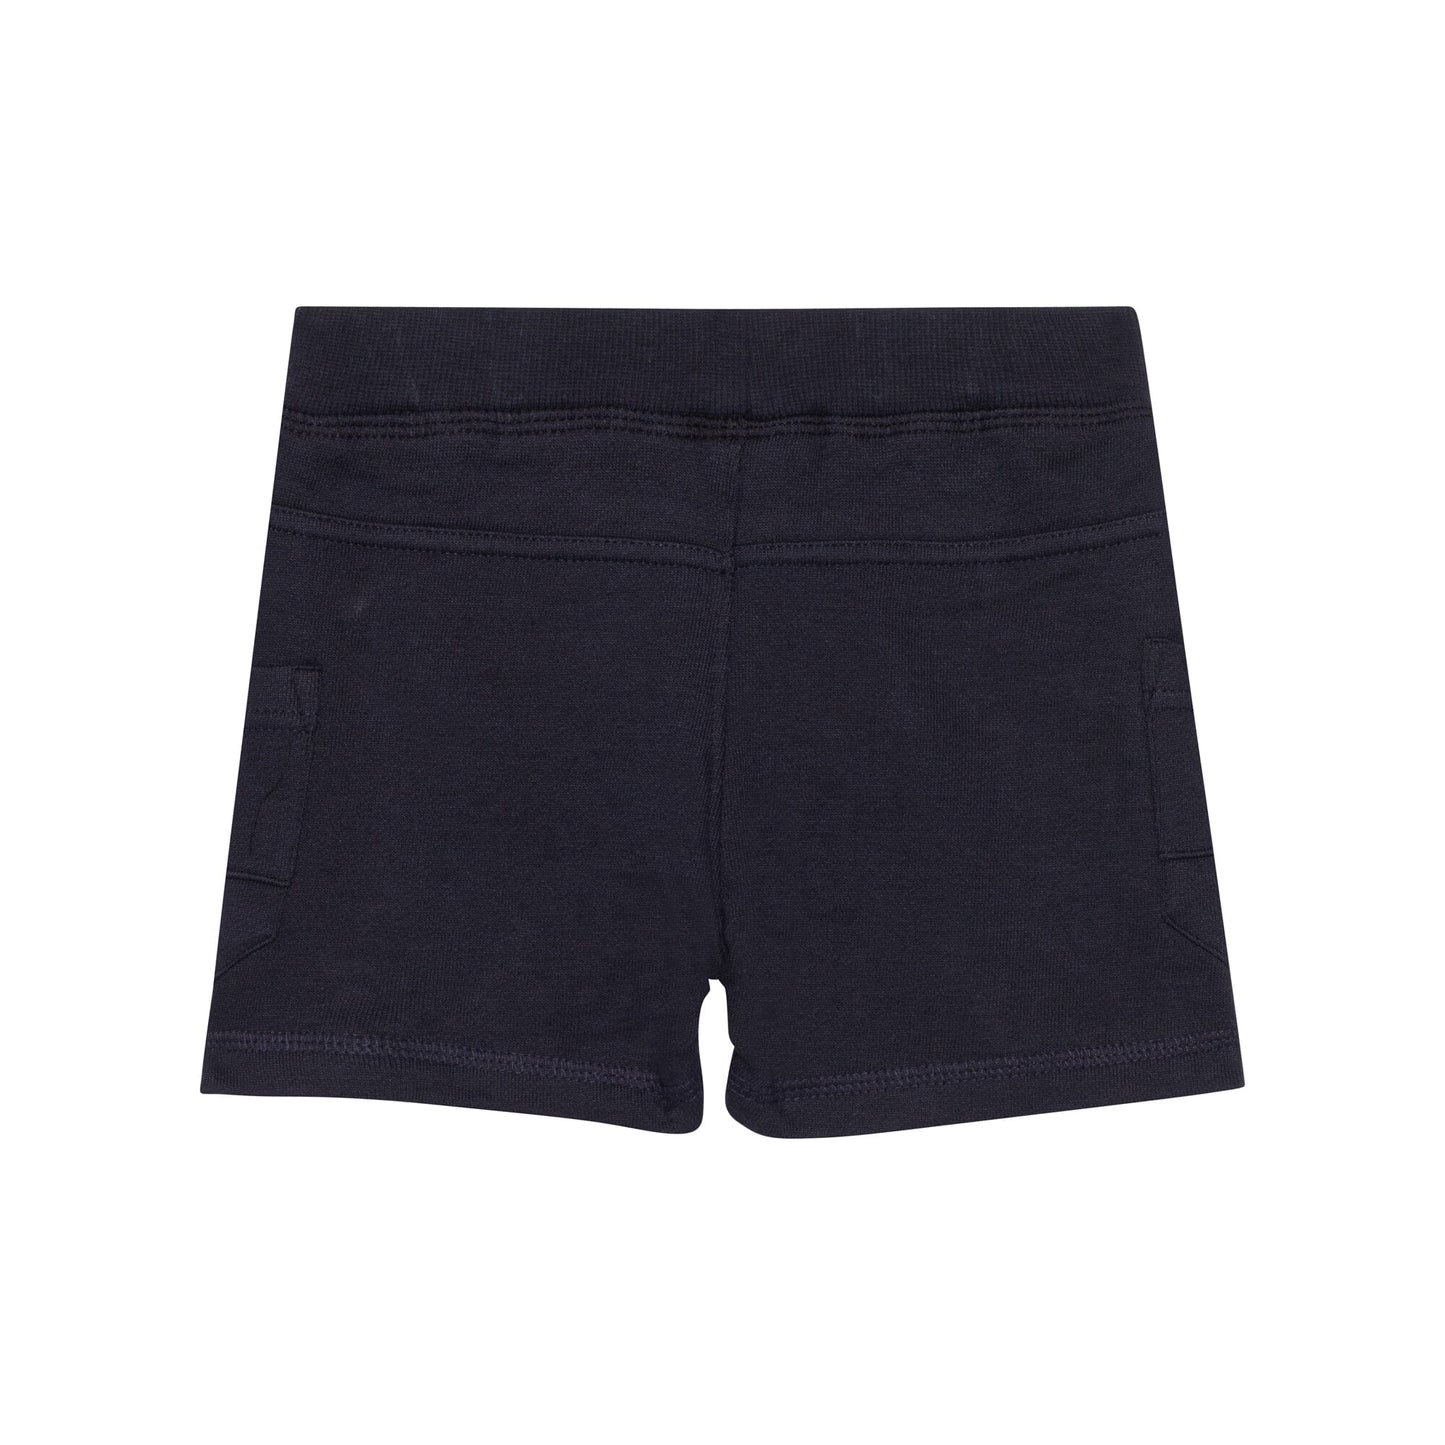 French Terry Short Dark Grey With Pockets - E30T25_964